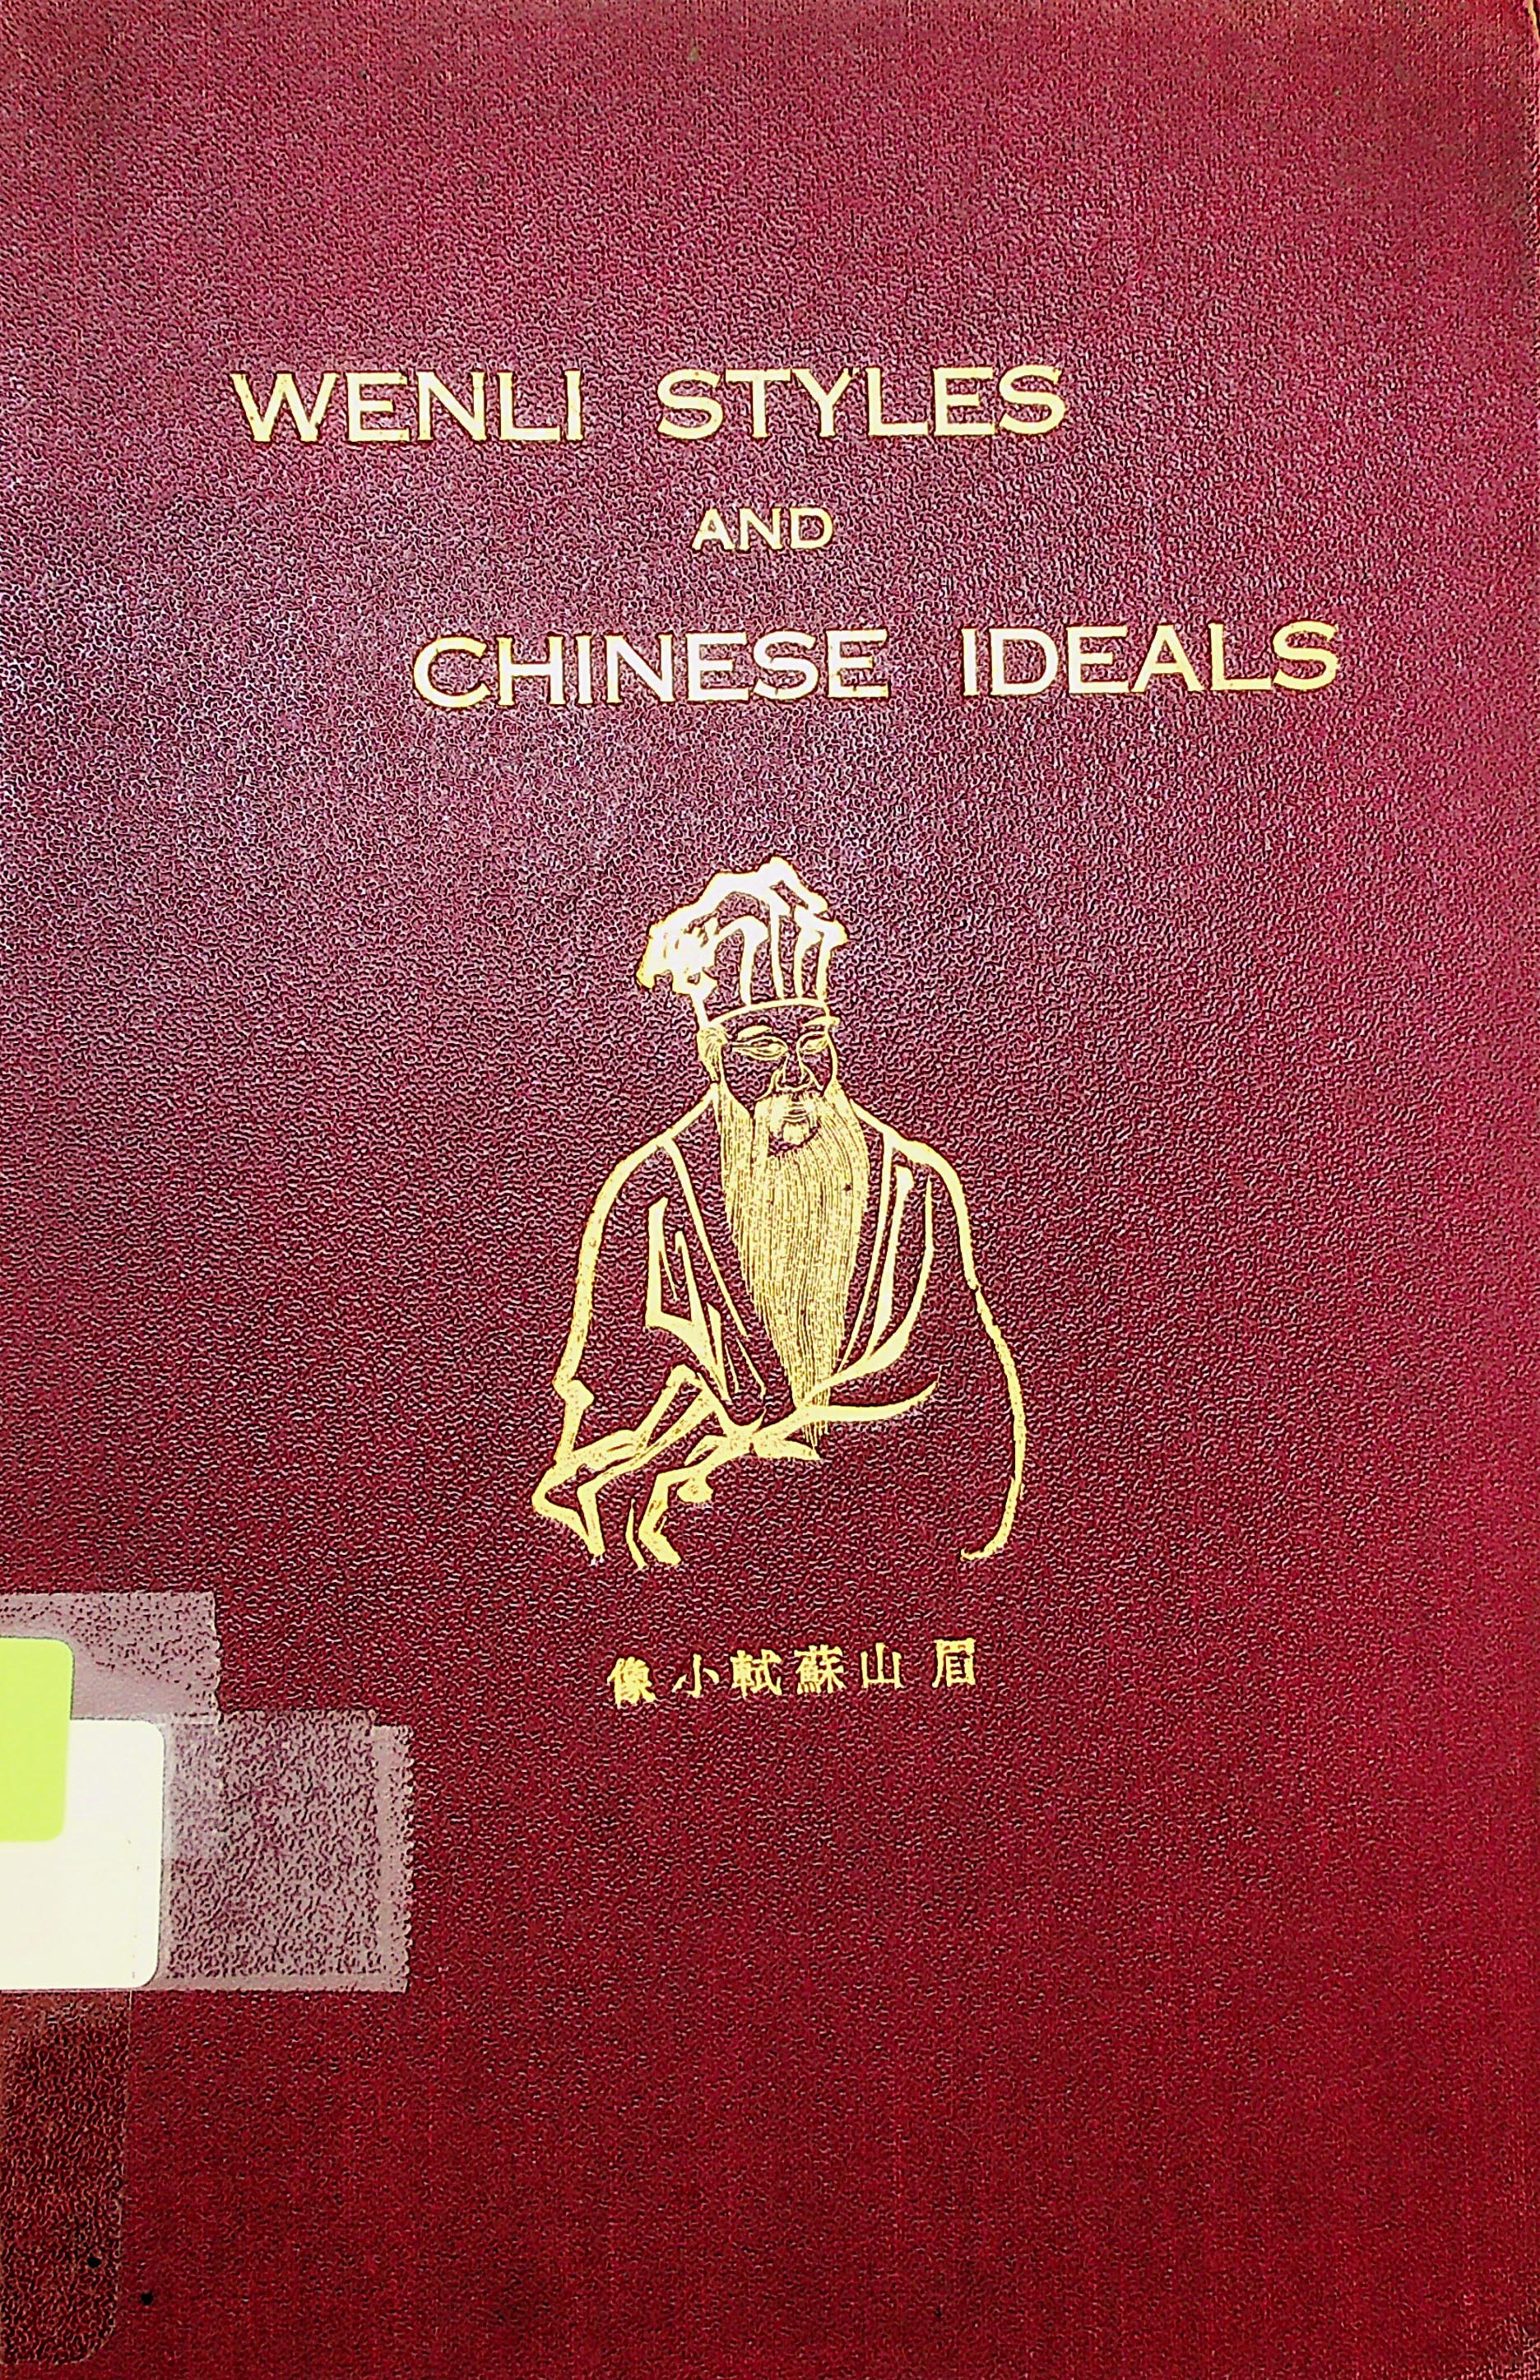 A guide to Wenli styles and Chinese ideals : essays, edicts, proclamations, memorials, letters, documents, inscriptions, commercial papers